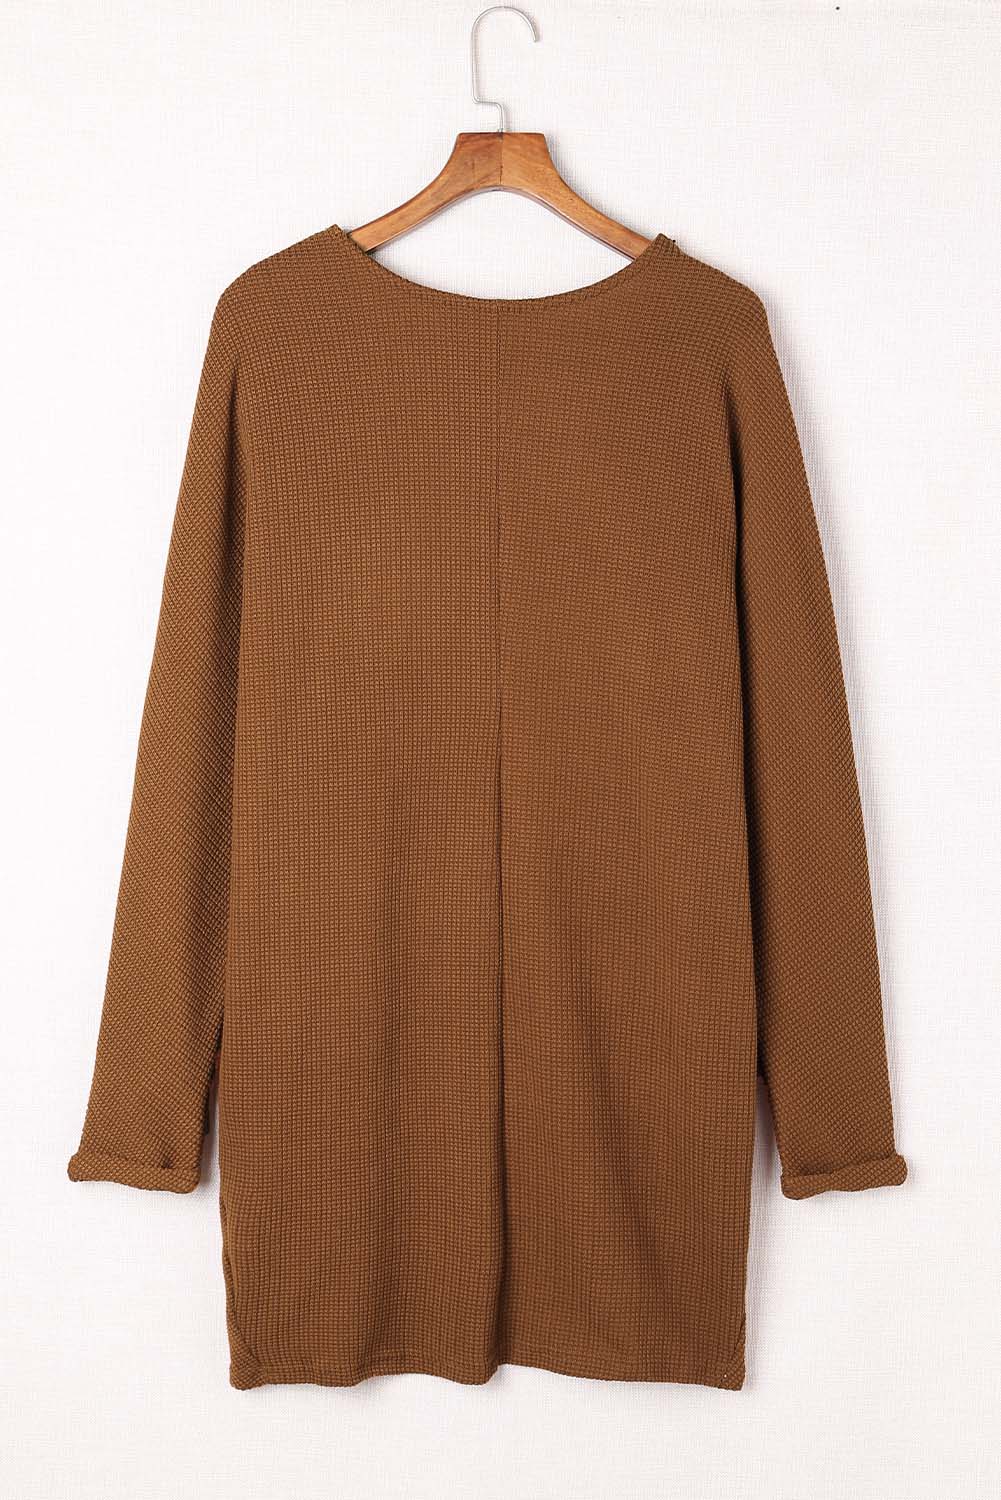 Pleated Detail Open Front Longline Cardigan - Online Only